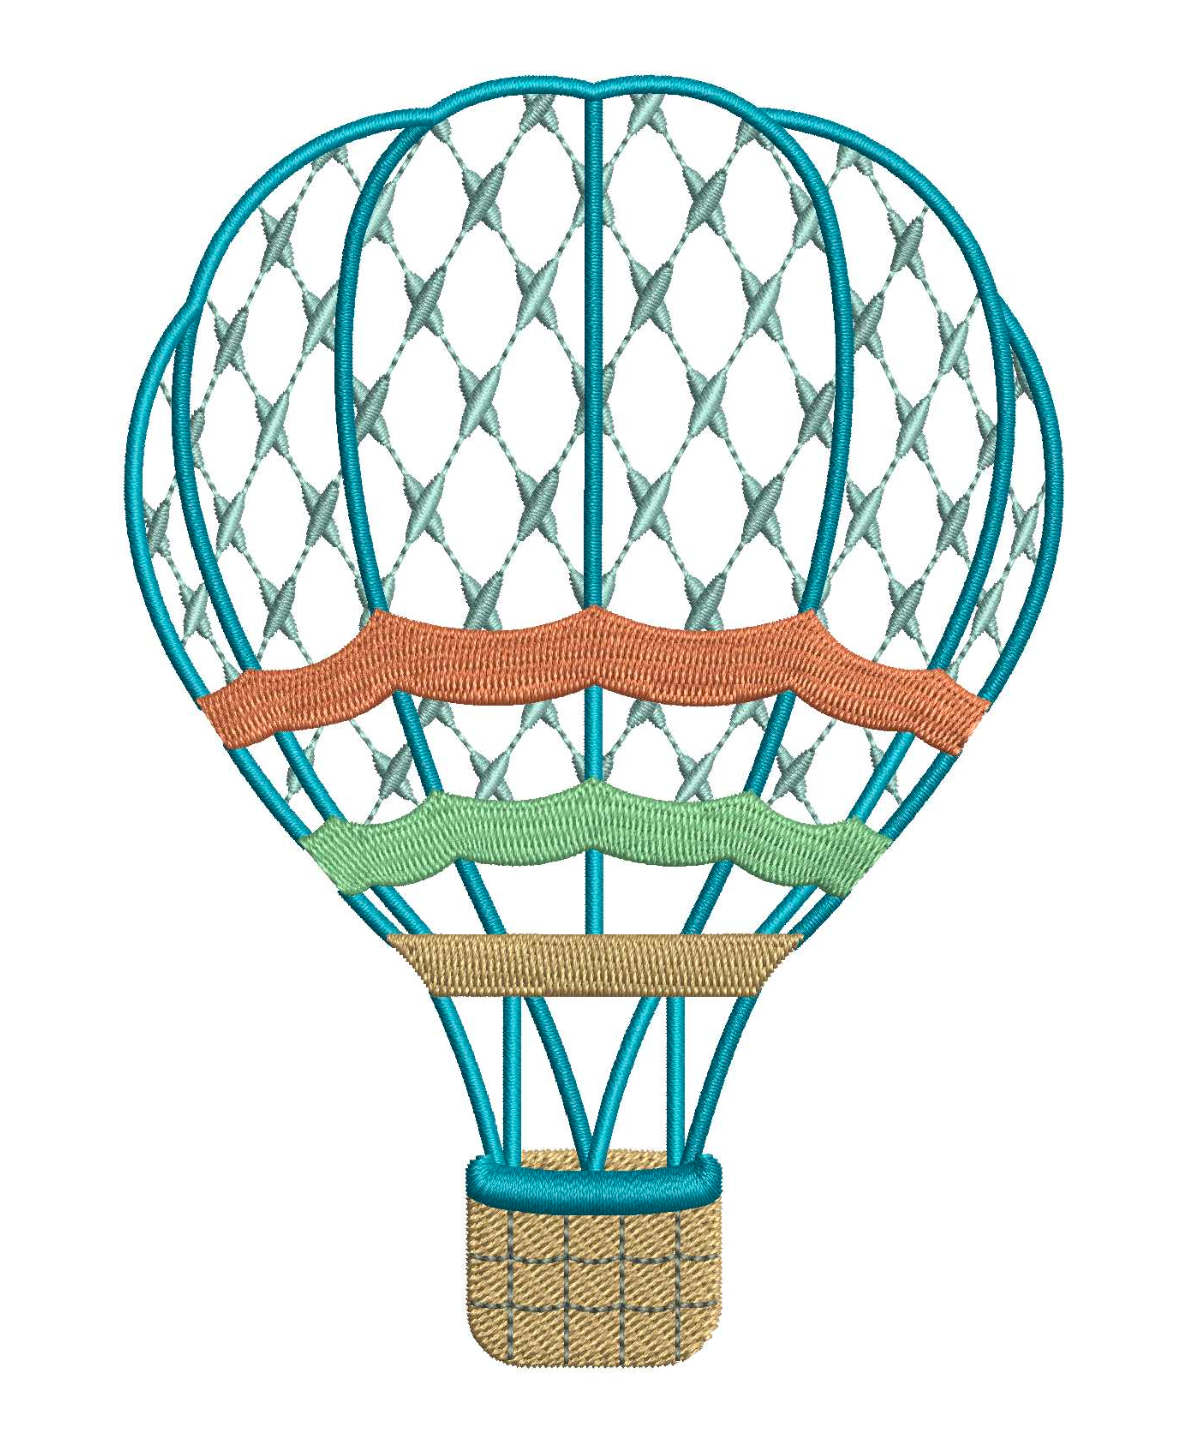 Chic Hot Air Balloon for Embroidery